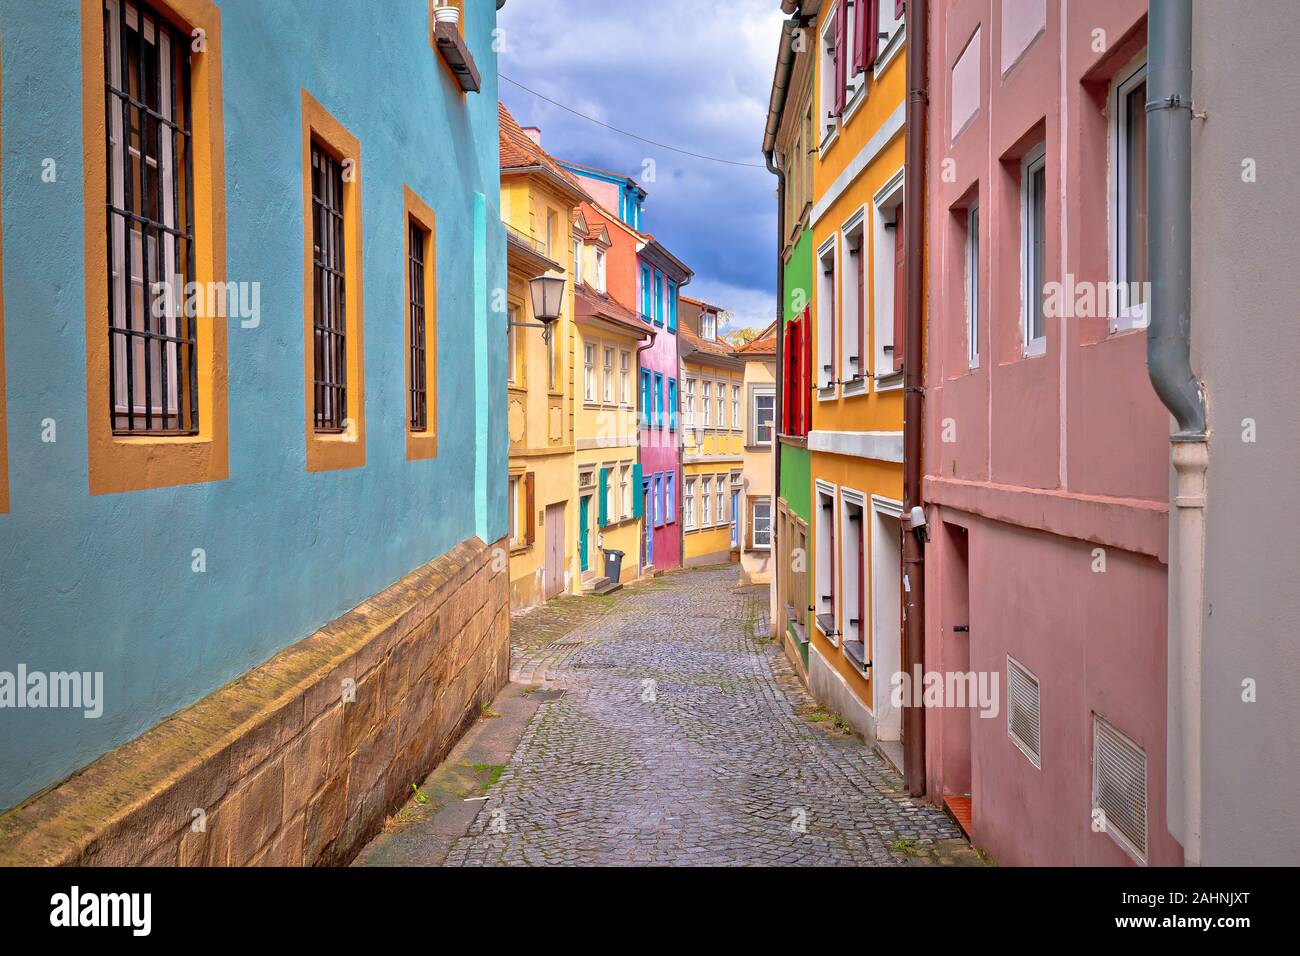 Bamberg. Colorful alley in Bamberg old town center view, Bavaria region of Germany Stock Photo